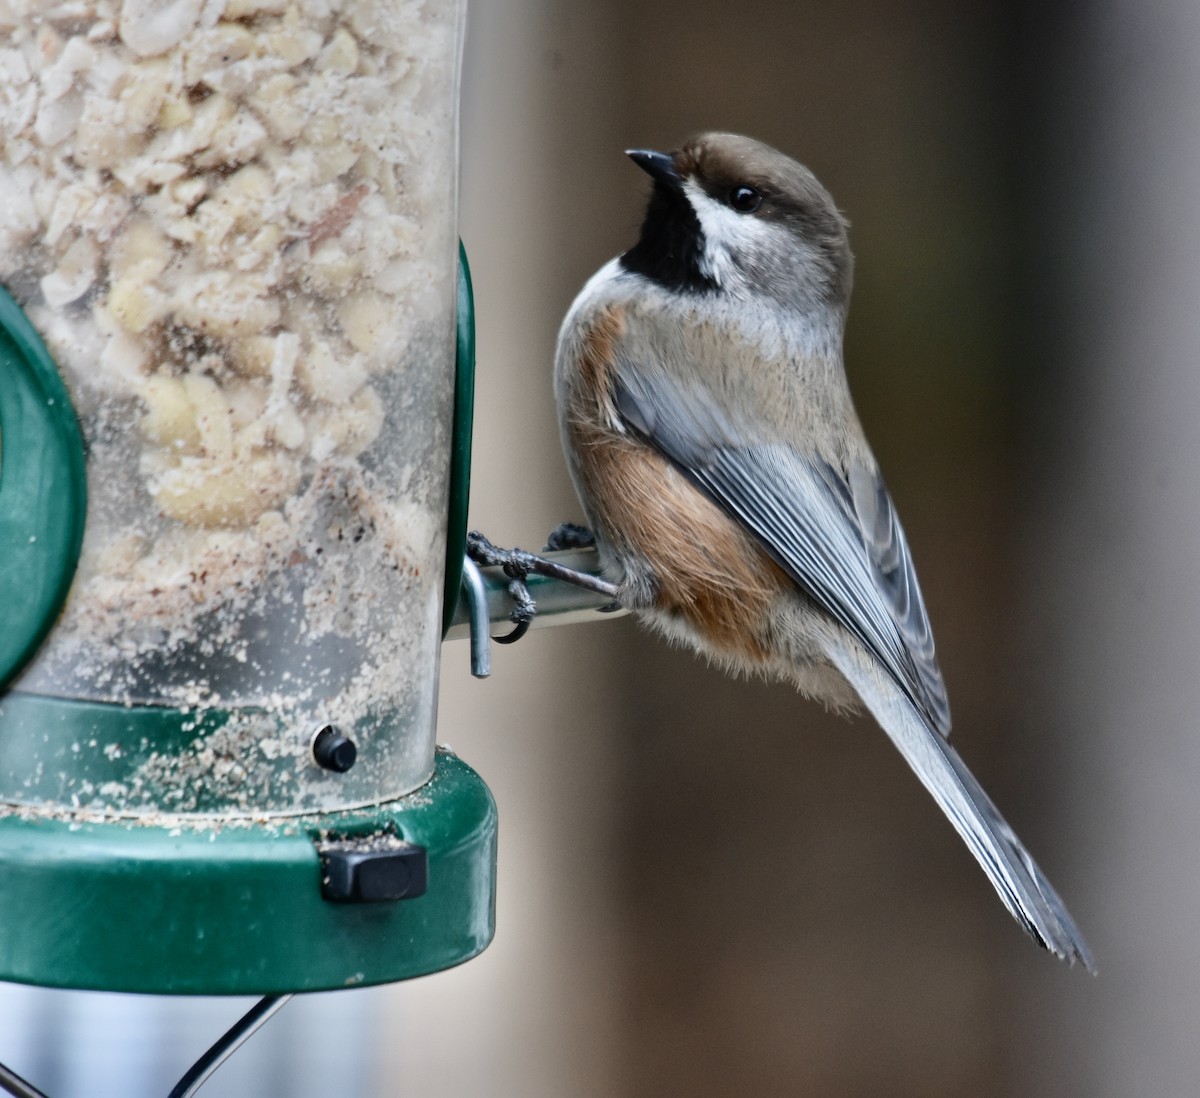 Boreal Chickadee - Susan and Andy Gower/Karassowitsch